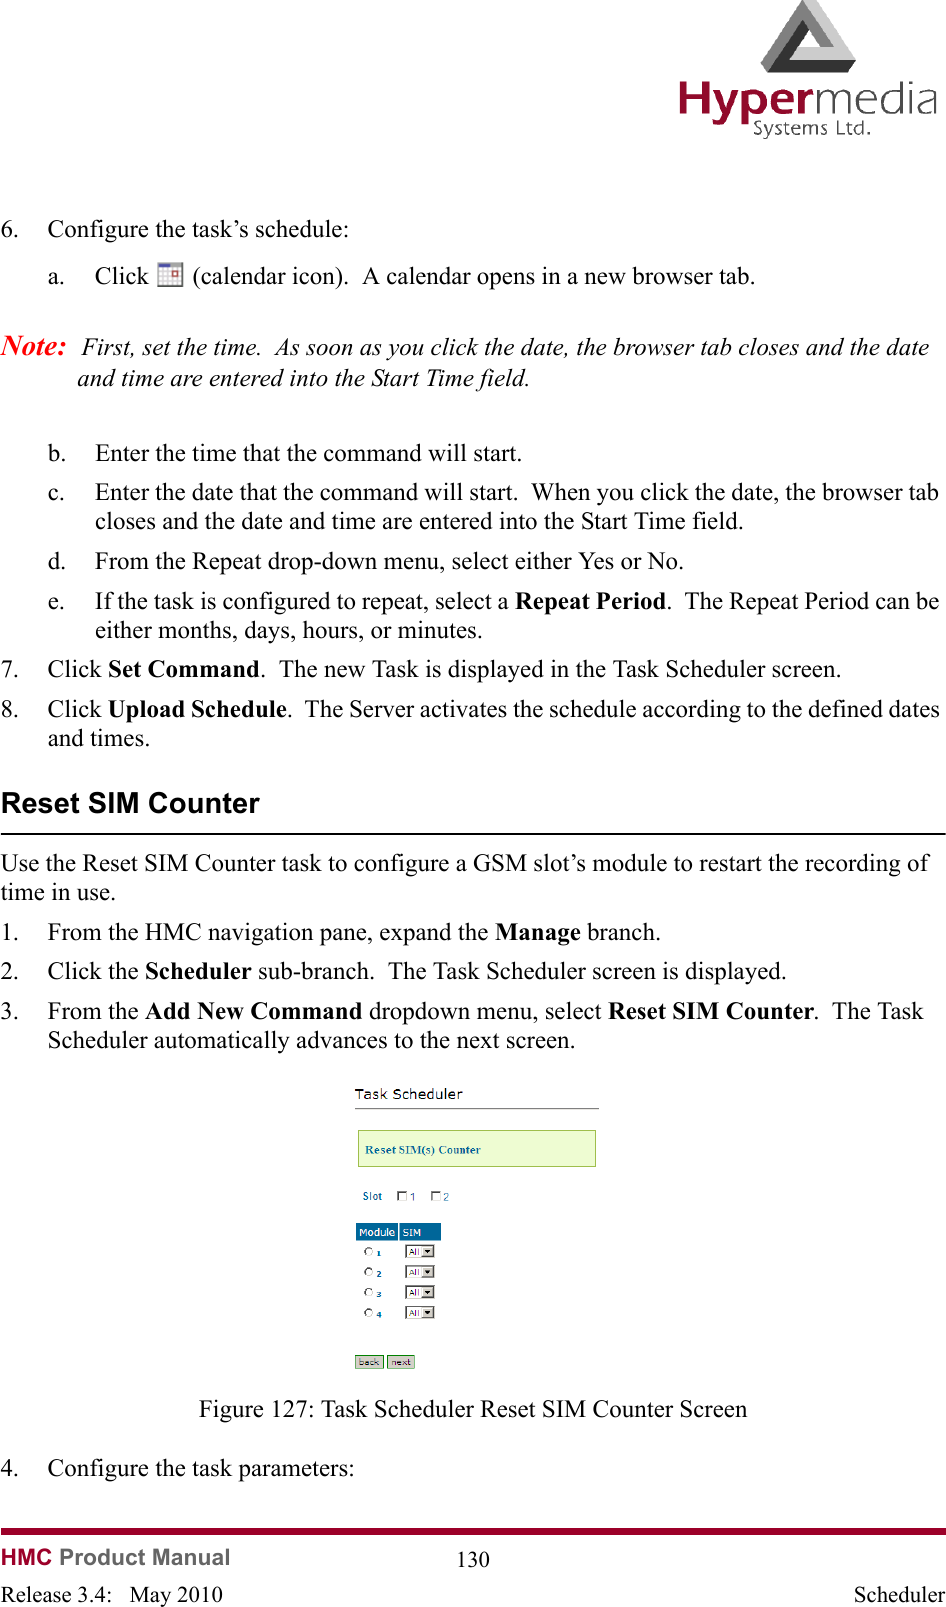   HMC Product Manual  130Release 3.4:   May 2010 Scheduler6. Configure the task’s schedule:a. Click   (calendar icon).  A calendar opens in a new browser tab.Note:  First, set the time.  As soon as you click the date, the browser tab closes and the date and time are entered into the Start Time field.b. Enter the time that the command will start.c. Enter the date that the command will start.  When you click the date, the browser tab closes and the date and time are entered into the Start Time field.d. From the Repeat drop-down menu, select either Yes or No.e. If the task is configured to repeat, select a Repeat Period.  The Repeat Period can be either months, days, hours, or minutes.7. Click Set Command.  The new Task is displayed in the Task Scheduler screen.8. Click Upload Schedule.  The Server activates the schedule according to the defined dates and times.Reset SIM CounterUse the Reset SIM Counter task to configure a GSM slot’s module to restart the recording of time in use.1. From the HMC navigation pane, expand the Manage branch.2. Click the Scheduler sub-branch.  The Task Scheduler screen is displayed.3. From the Add New Command dropdown menu, select Reset SIM Counter.  The Task Scheduler automatically advances to the next screen.              Figure 127: Task Scheduler Reset SIM Counter Screen4. Configure the task parameters: